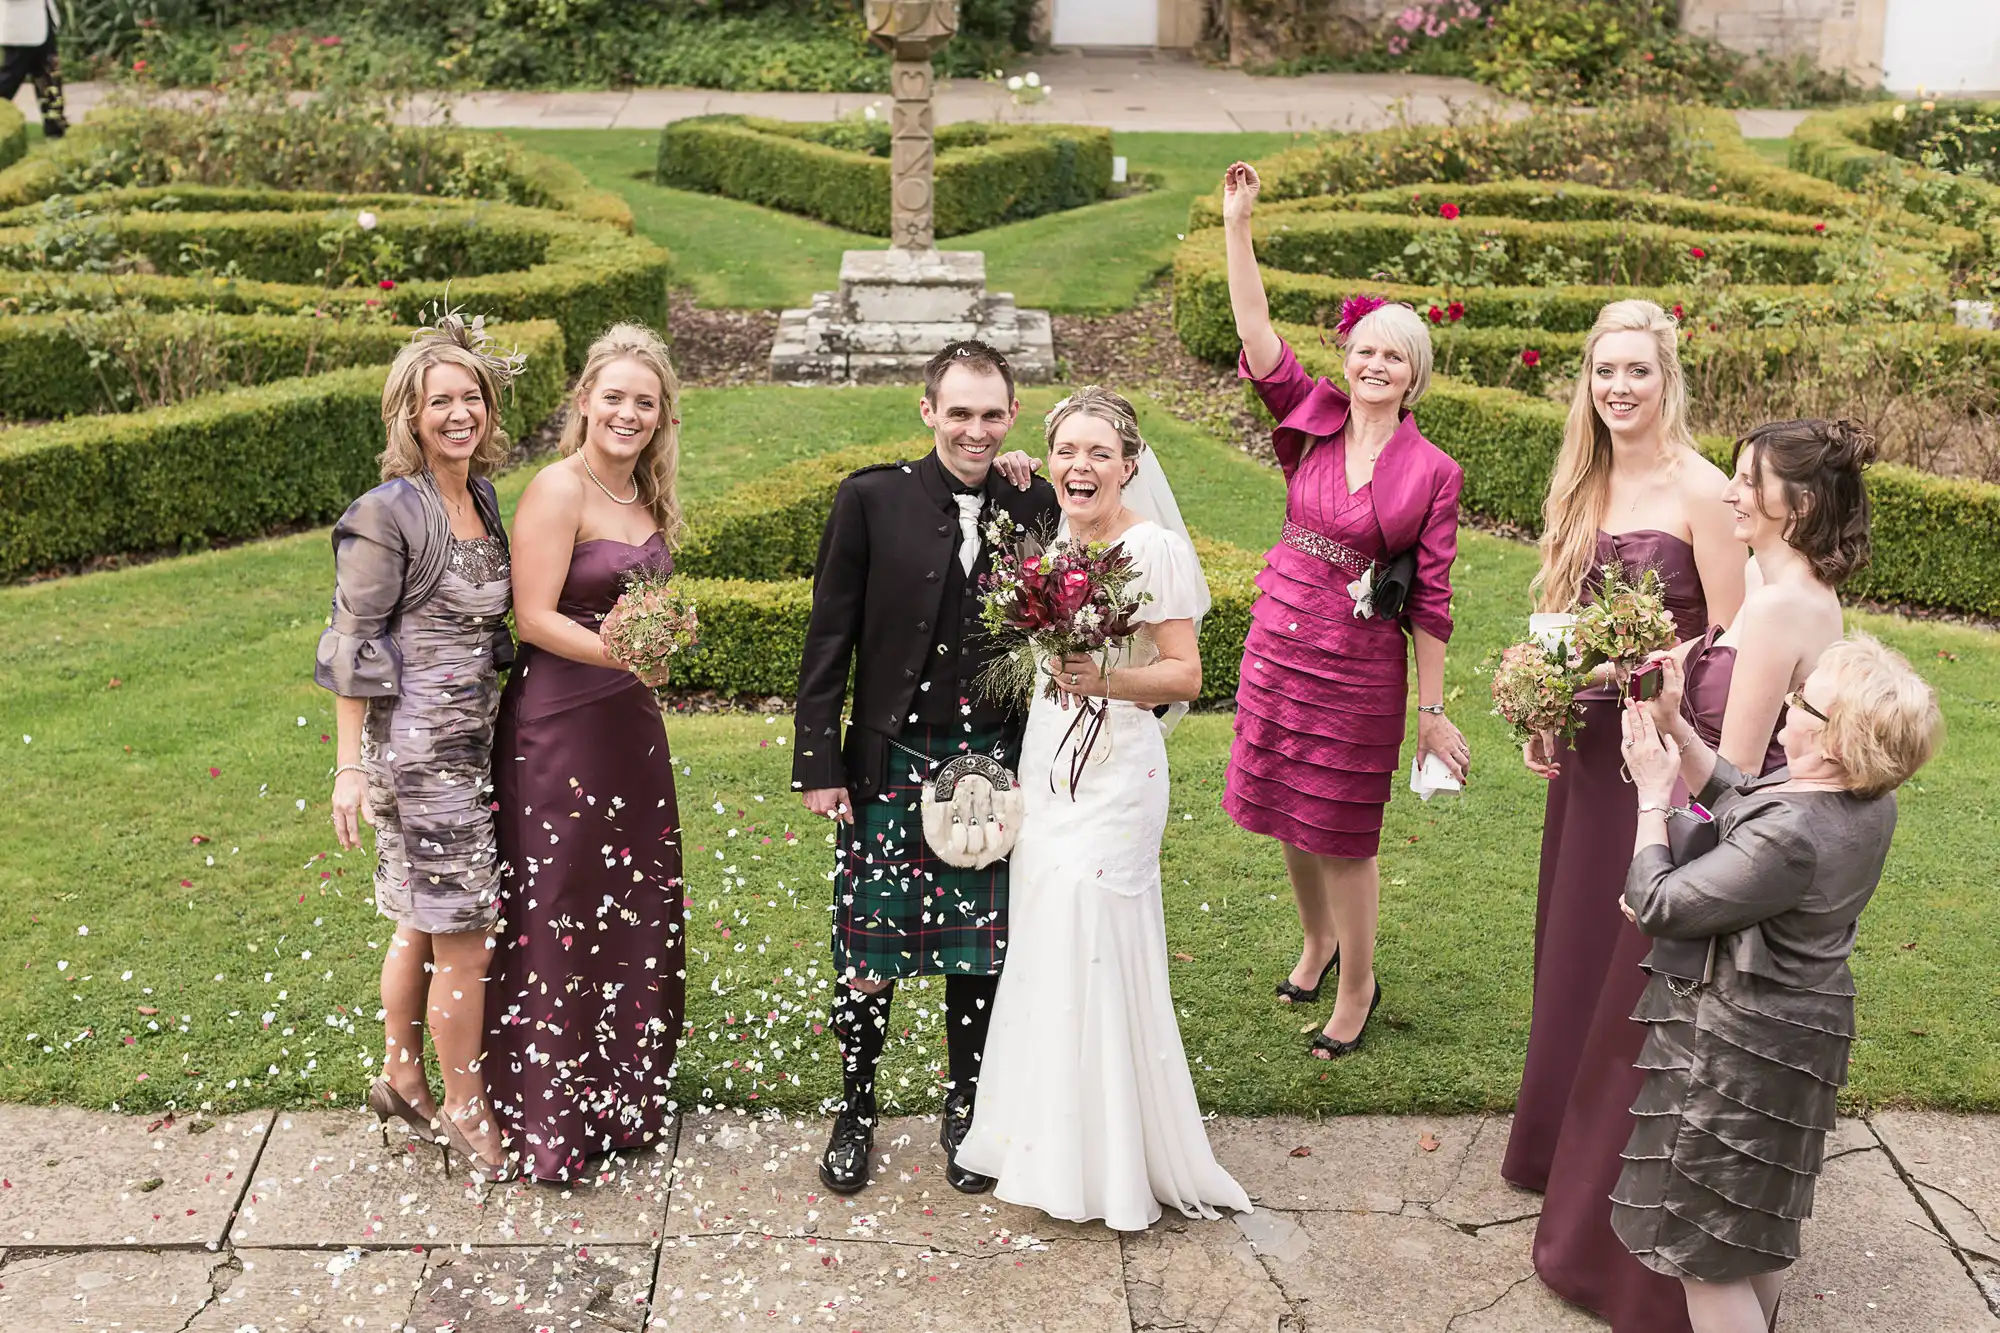 A joyful wedding scene with a bride and groom smiling among a group of five women throwing flower petals in an ornate garden.